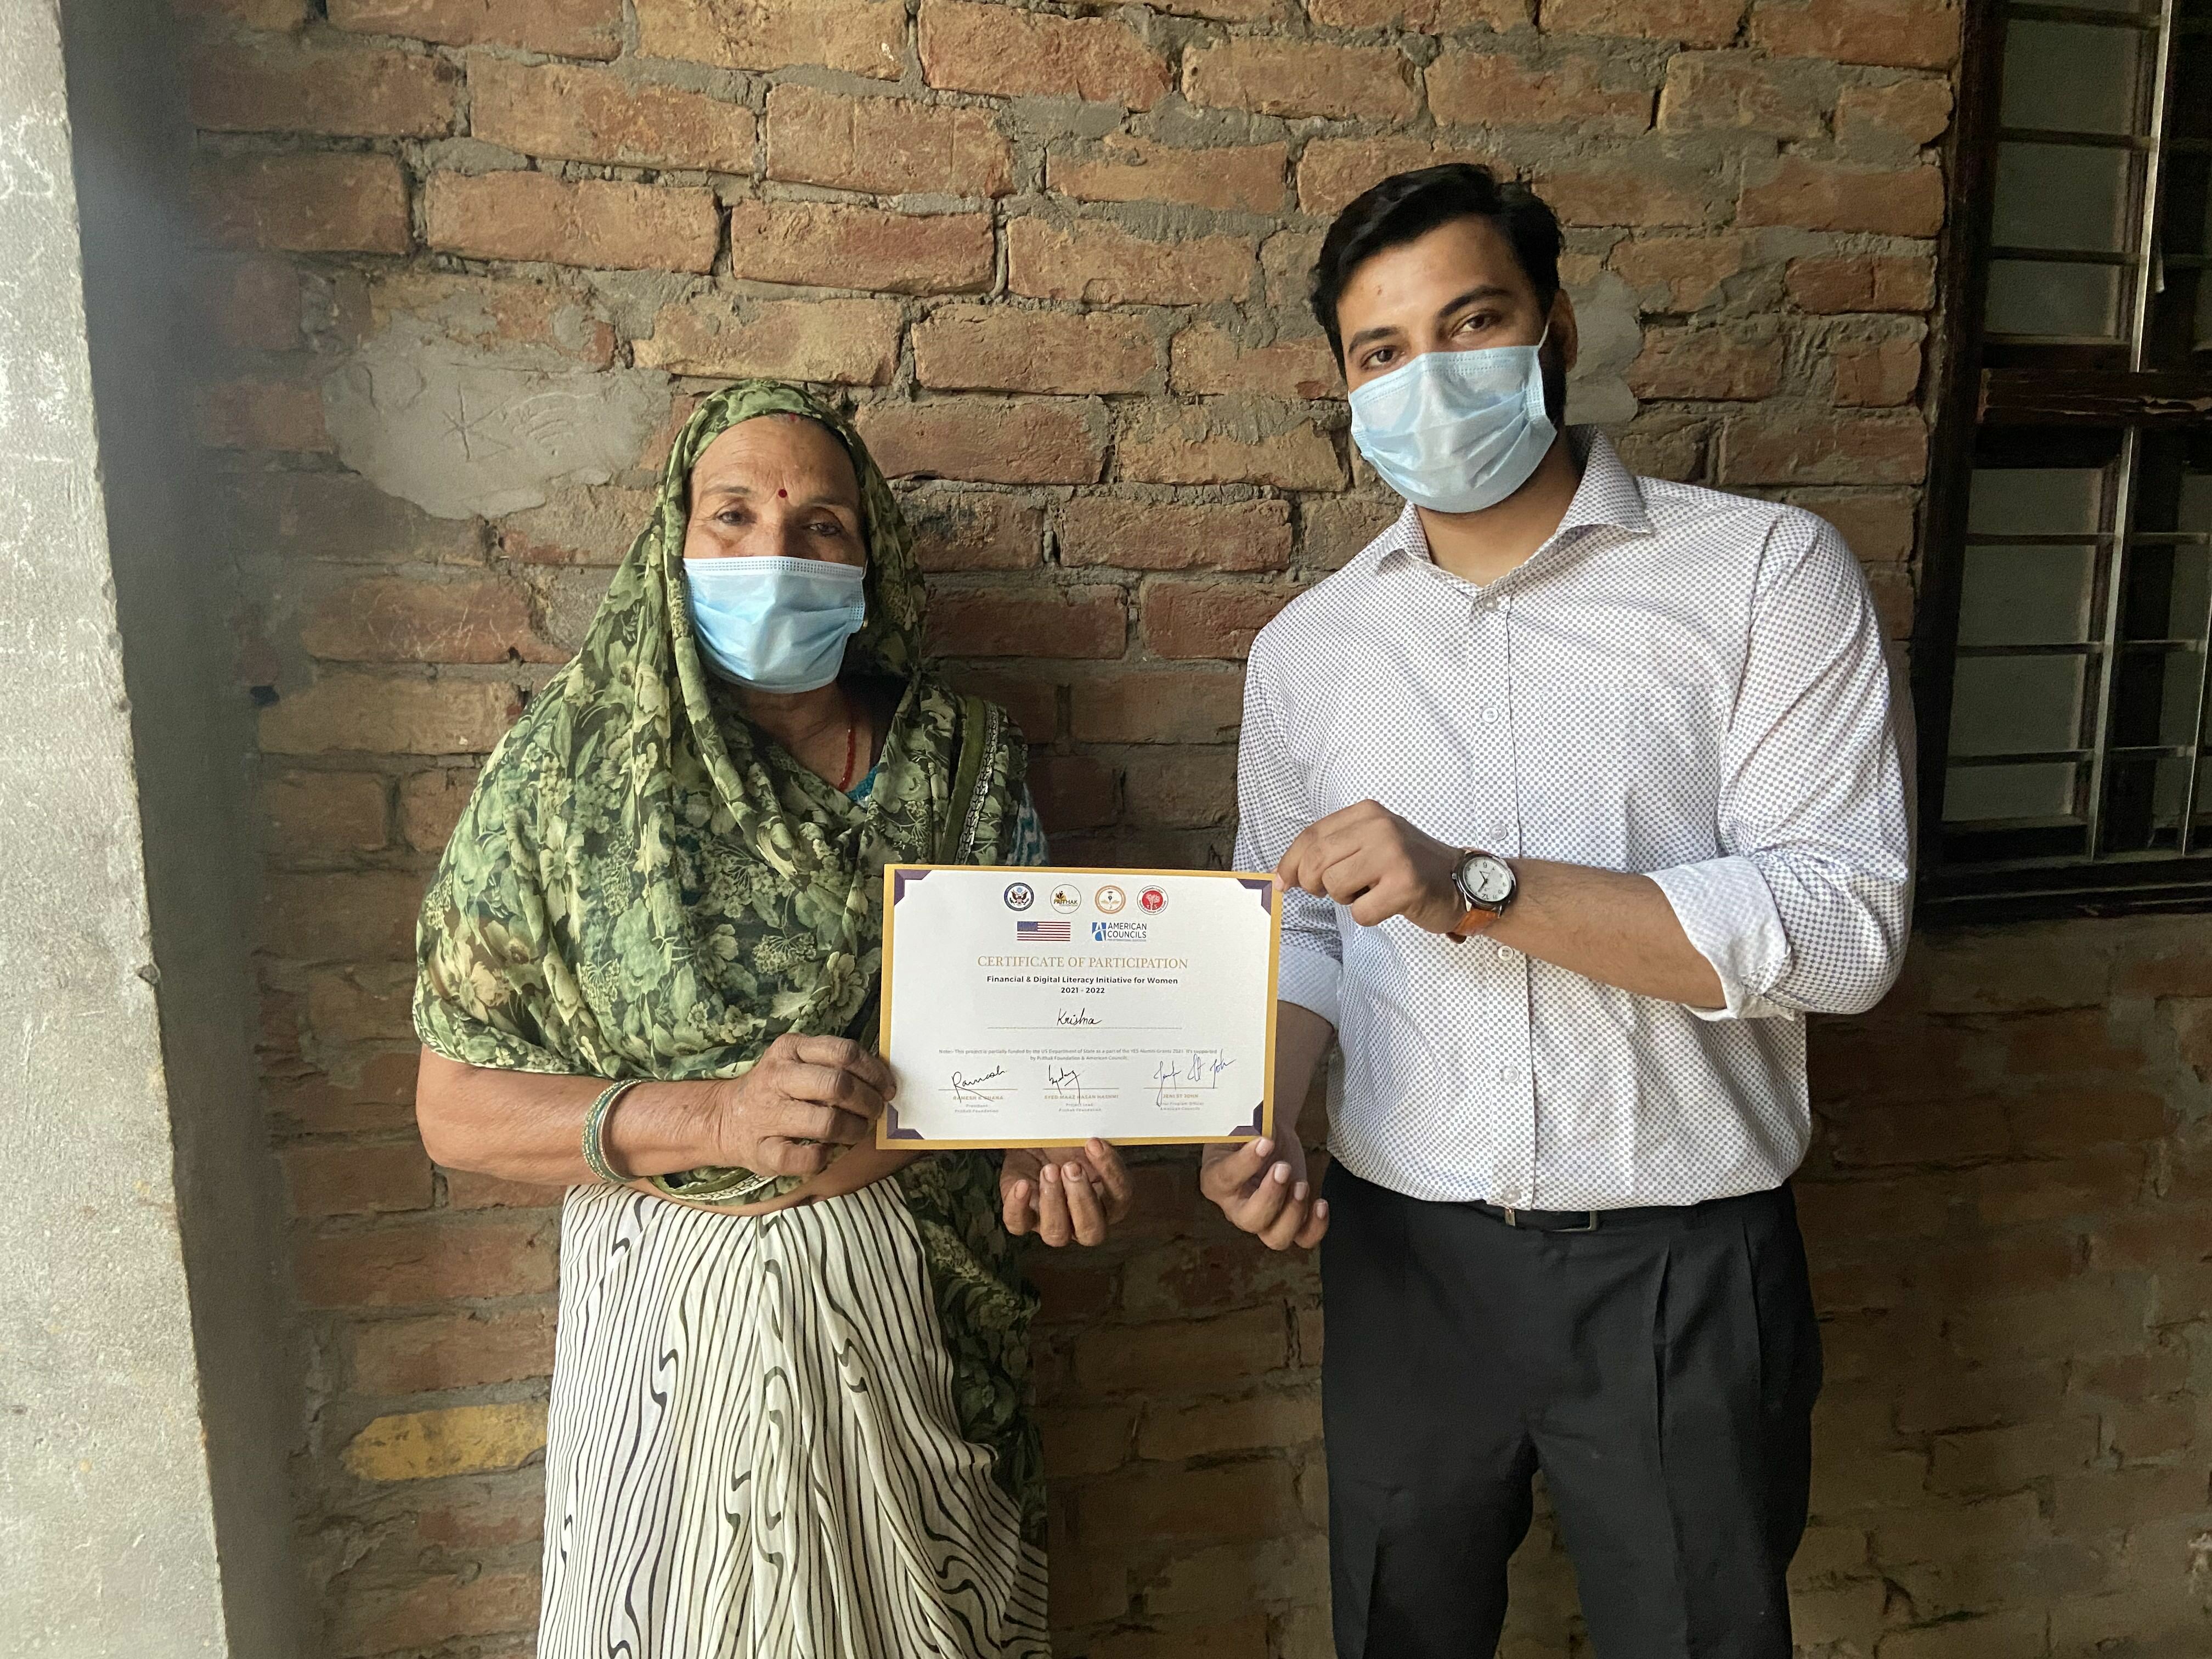 Syed Is Posing With A Participant While Handing Her A Certificate